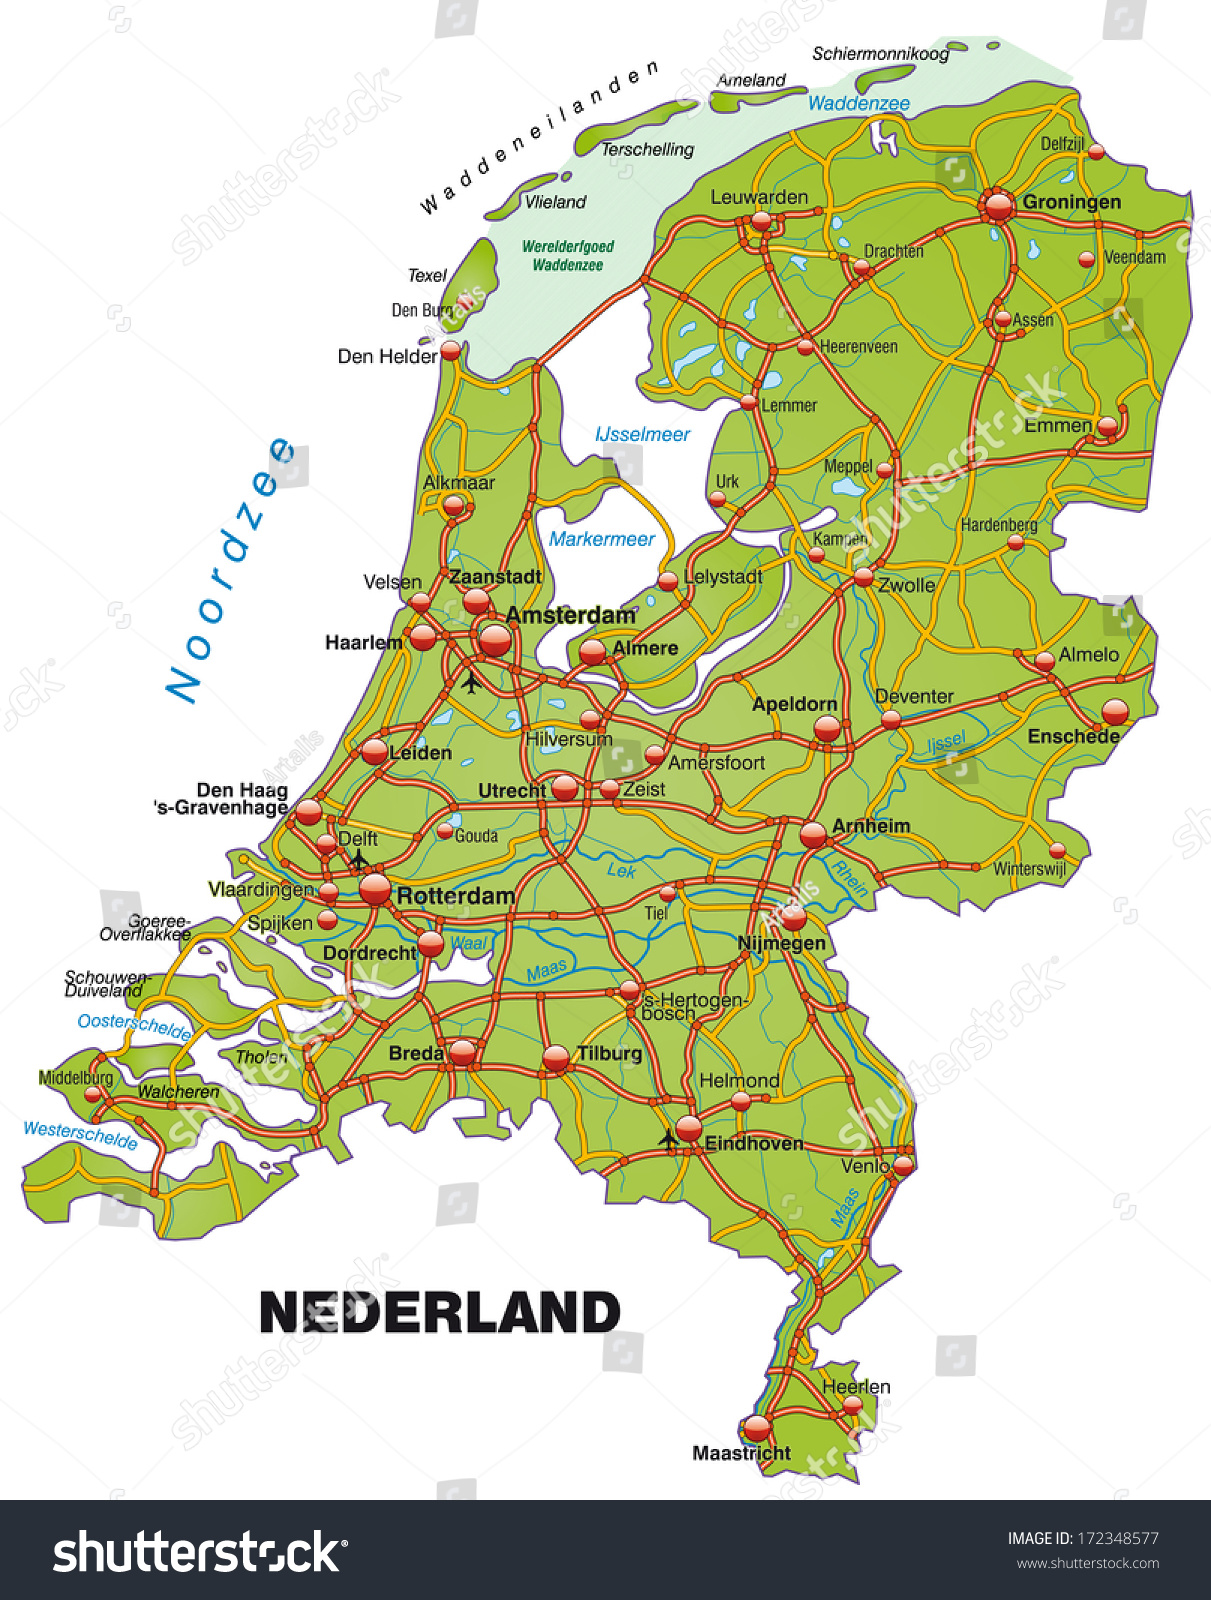 Map of Netherlands with highways - Royalty Free Stock Photo 172348577 ...